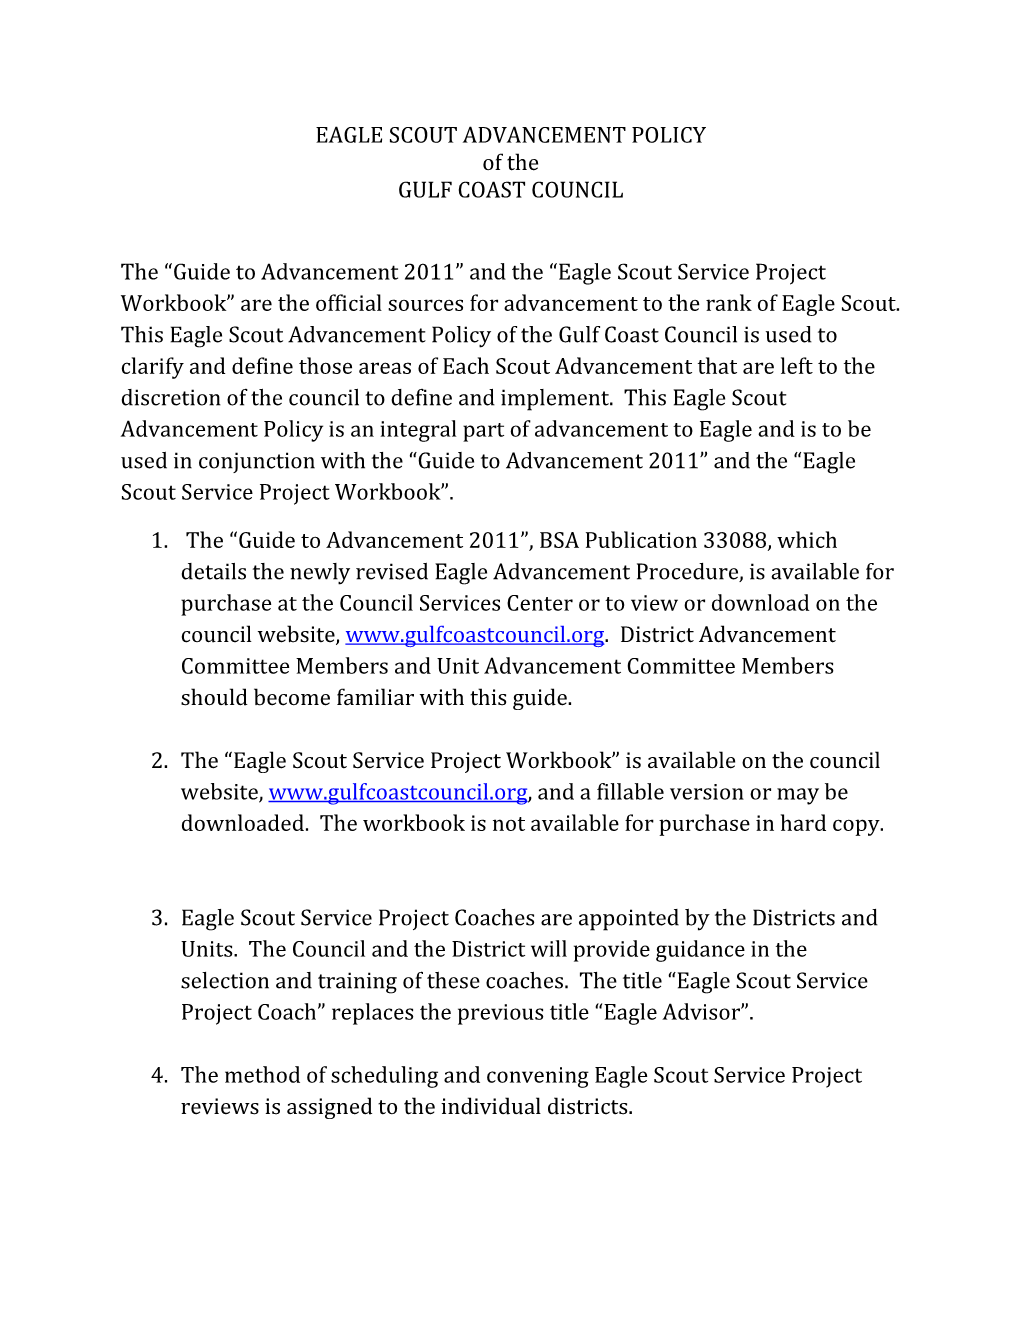 EAGLE SCOUT ADVANCEMENT POLICY of the GULF COAST COUNCIL